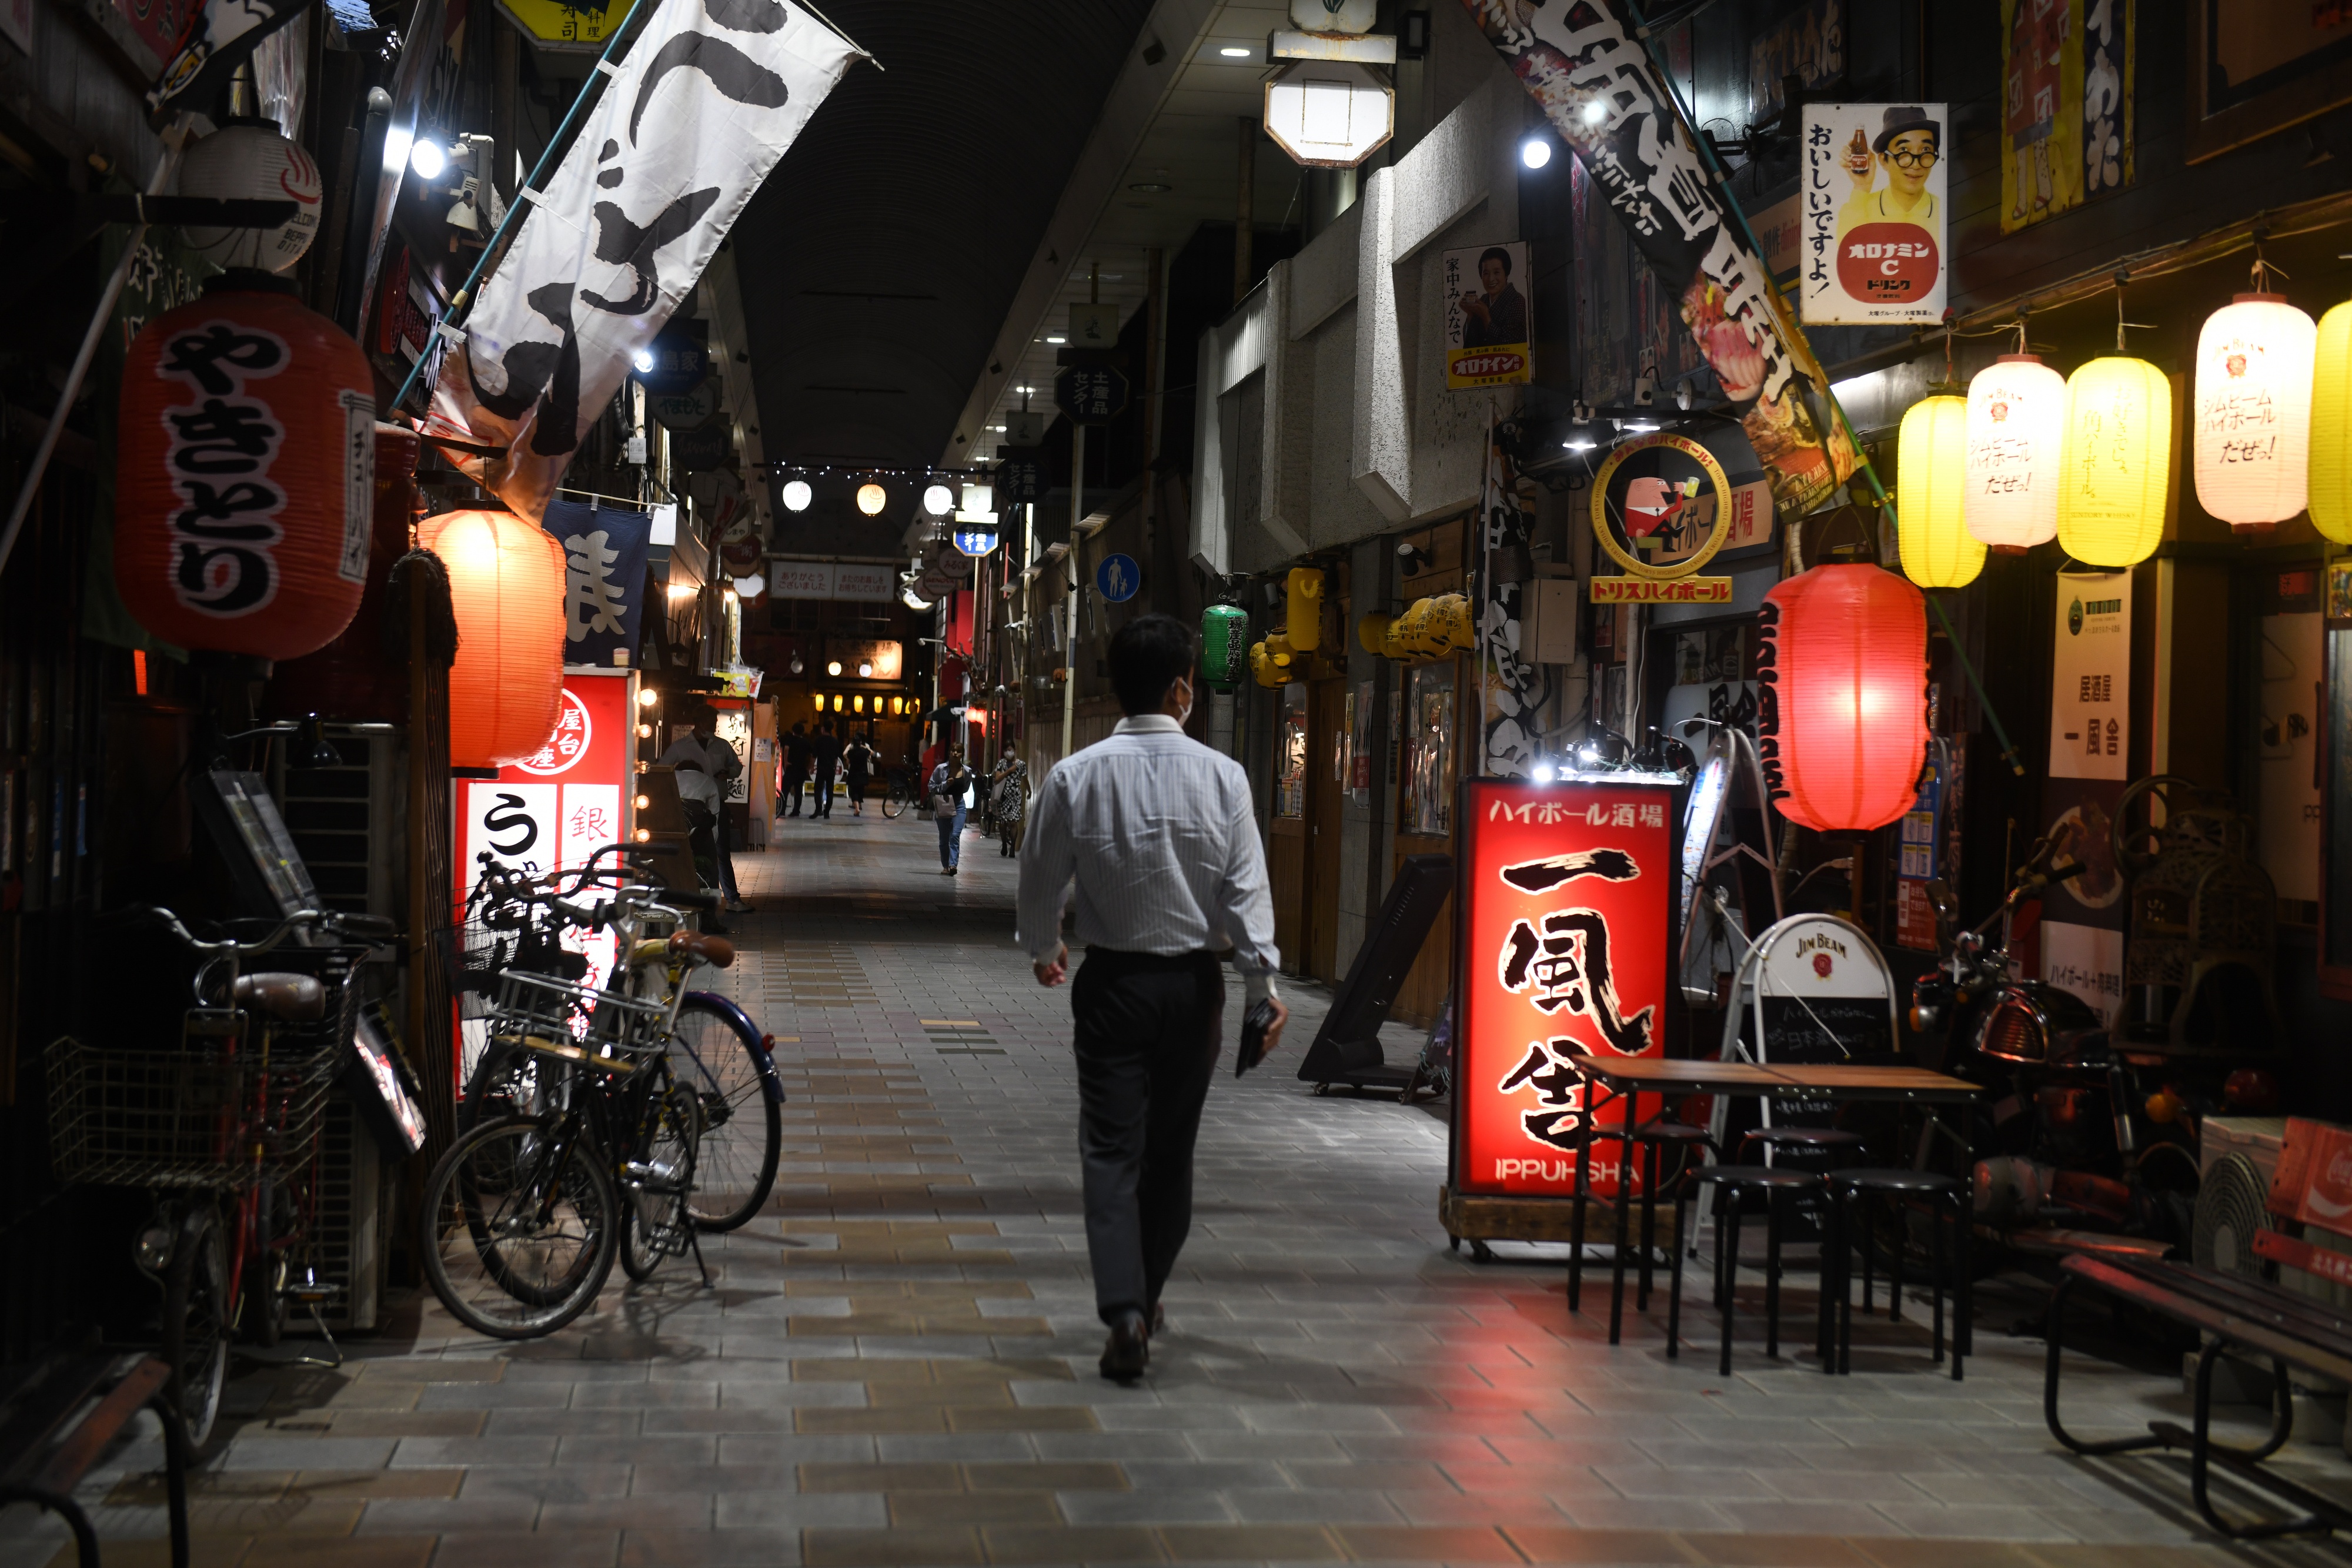 Japan Reopened Borders - But Visitors Find Hotels Understaffed And Shops Closed